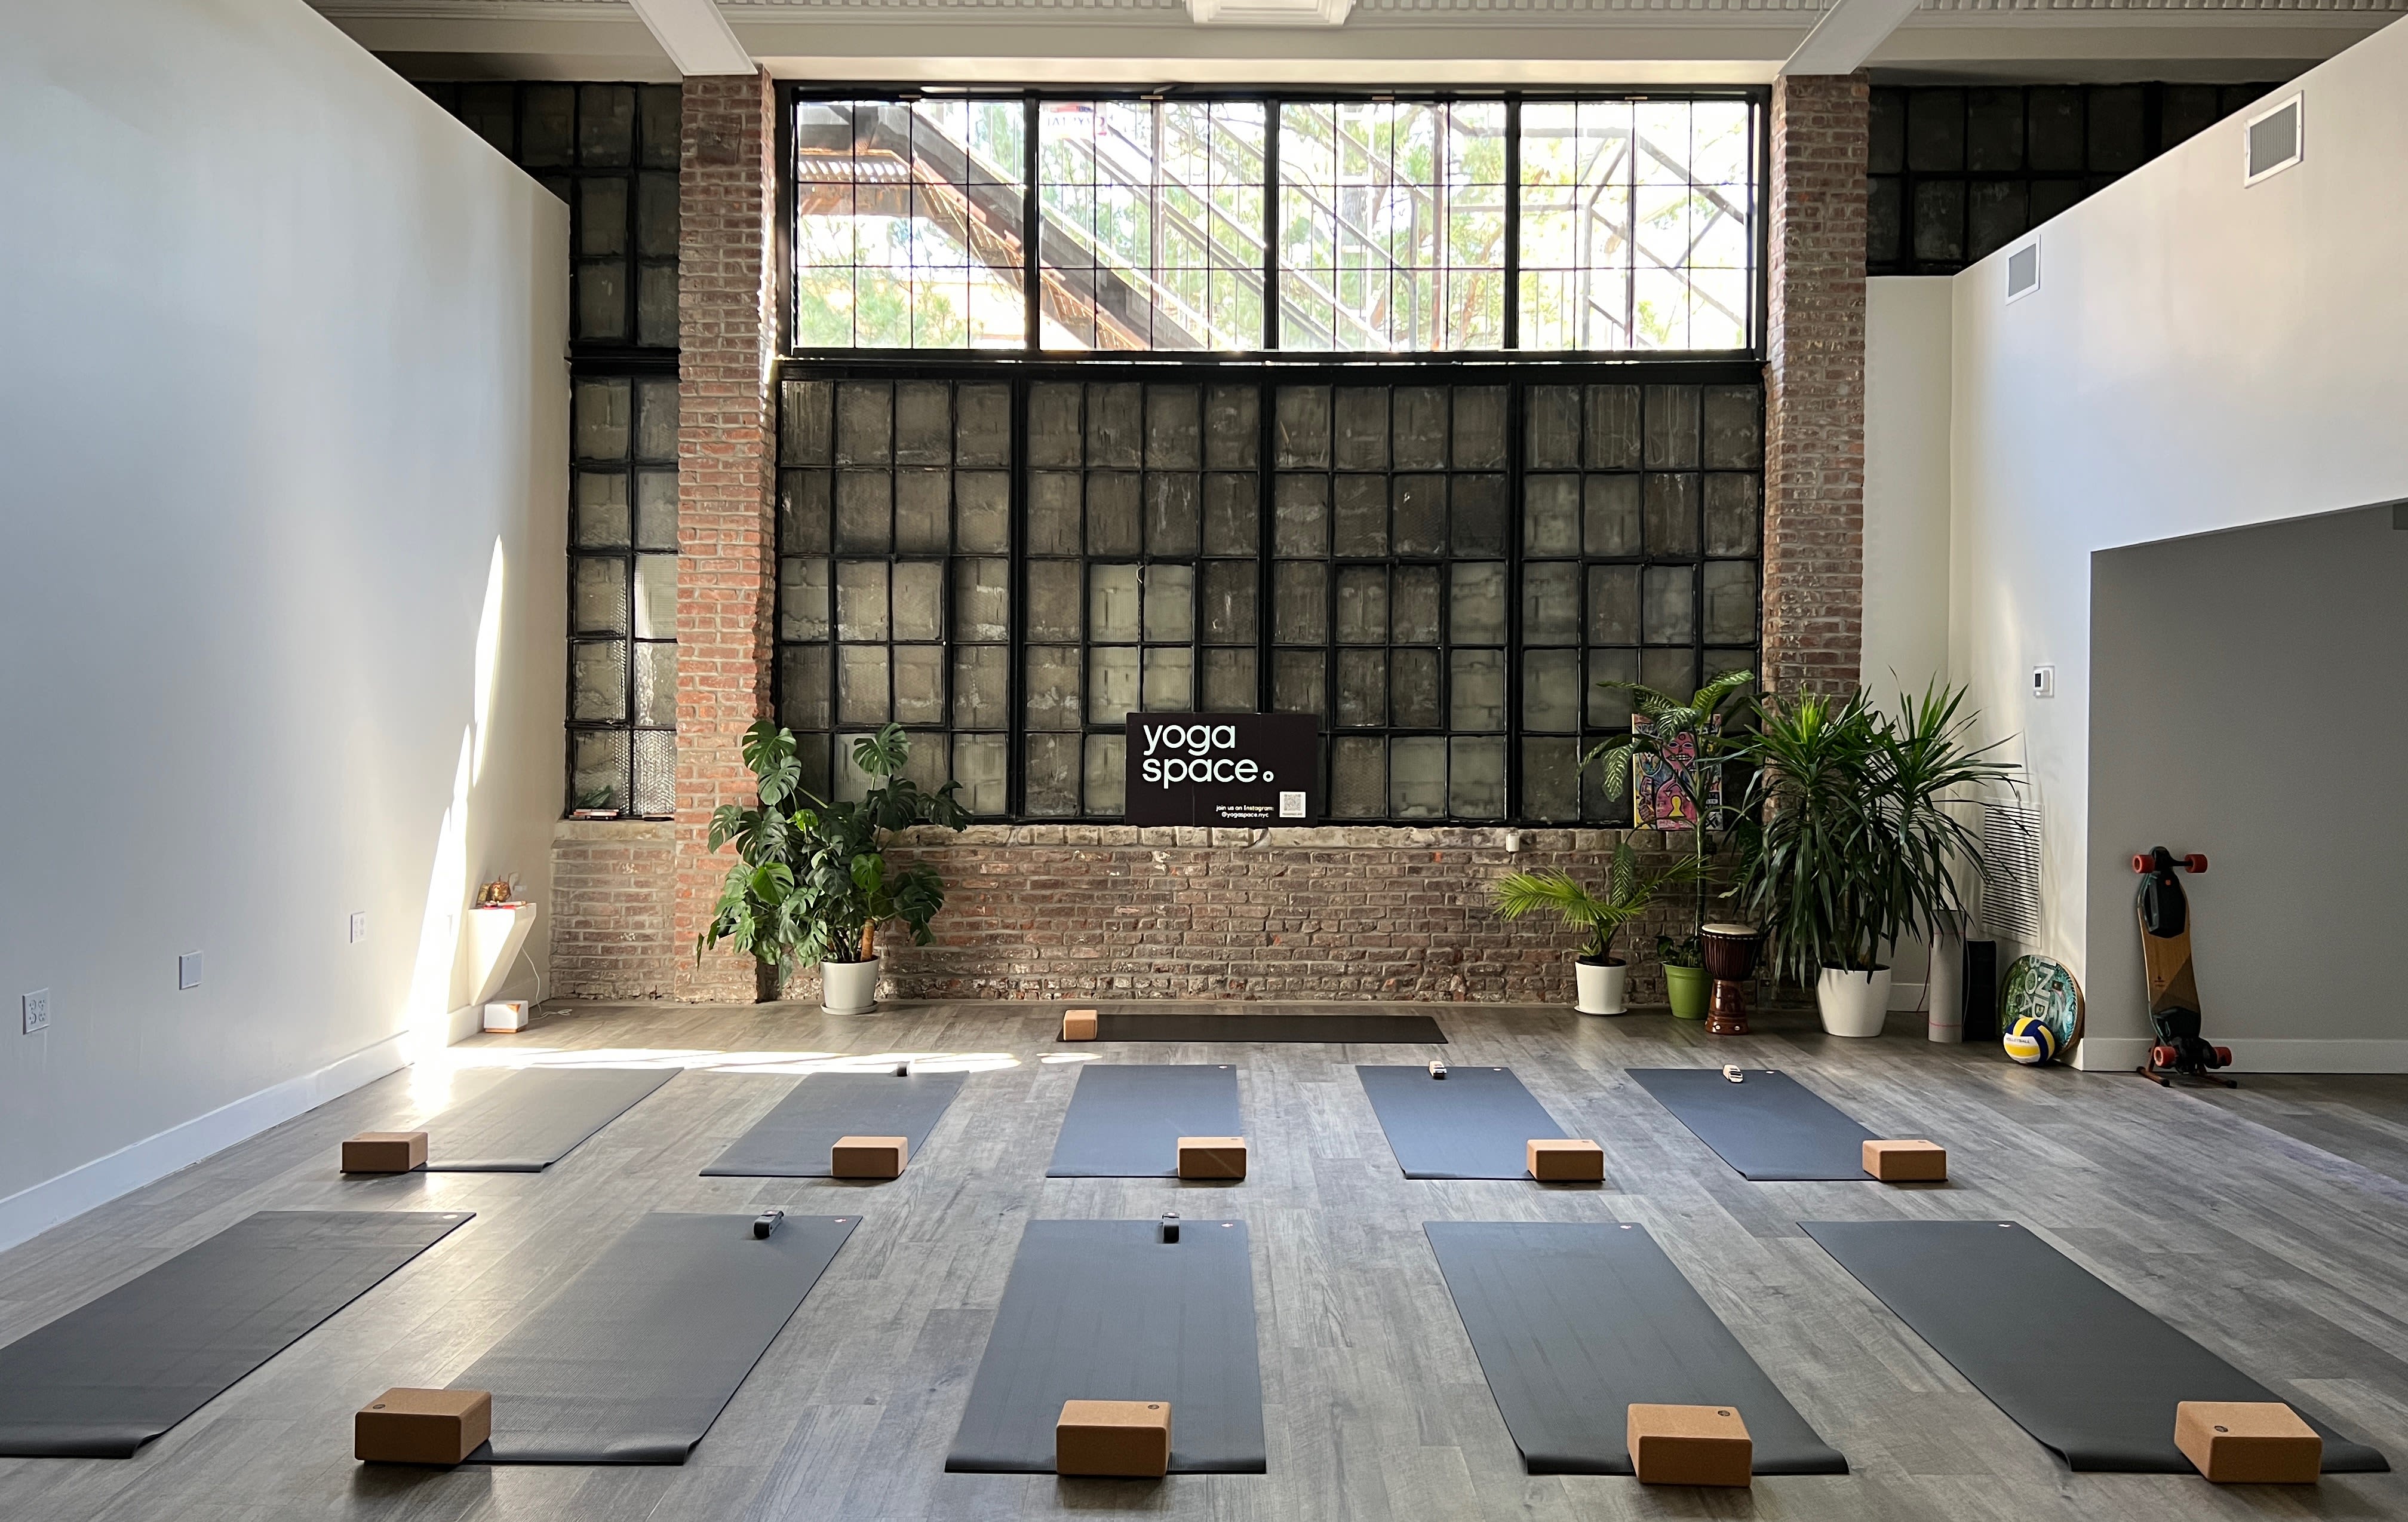 Yoga Space NYC: Read Reviews and Book Classes on ClassPass